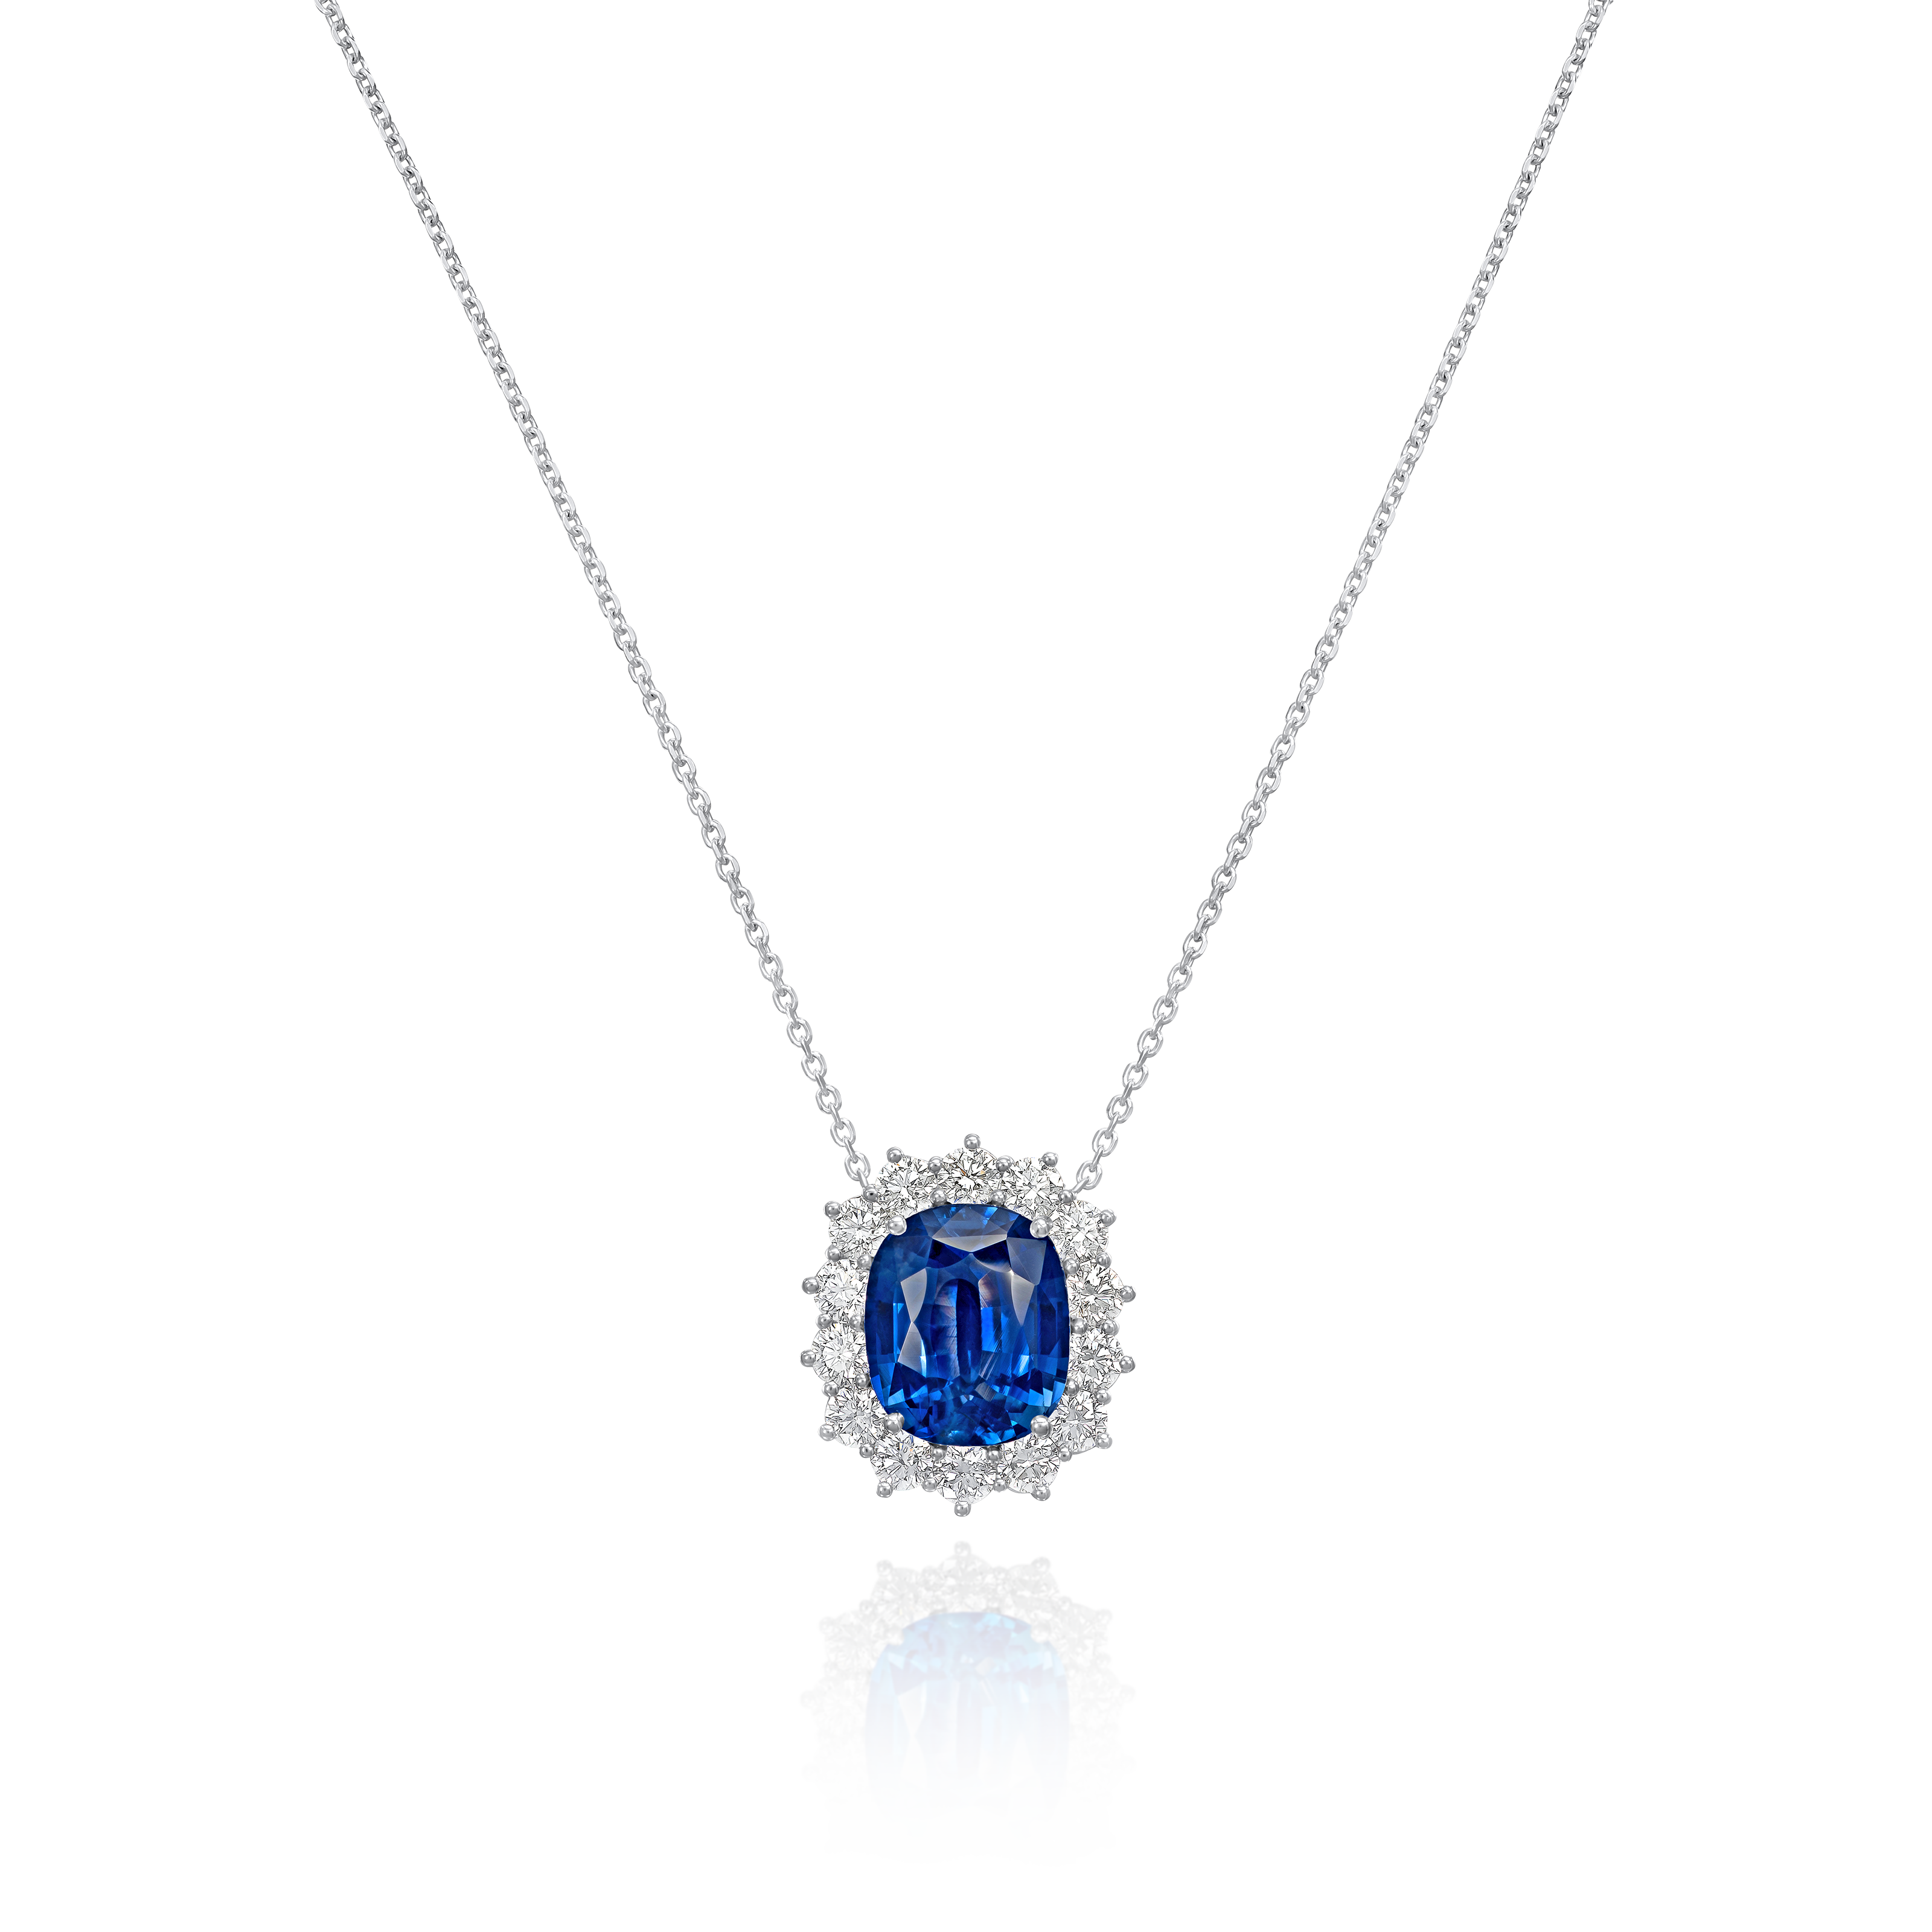 8.78cts Sapphire and Diamond Cluster Pendant